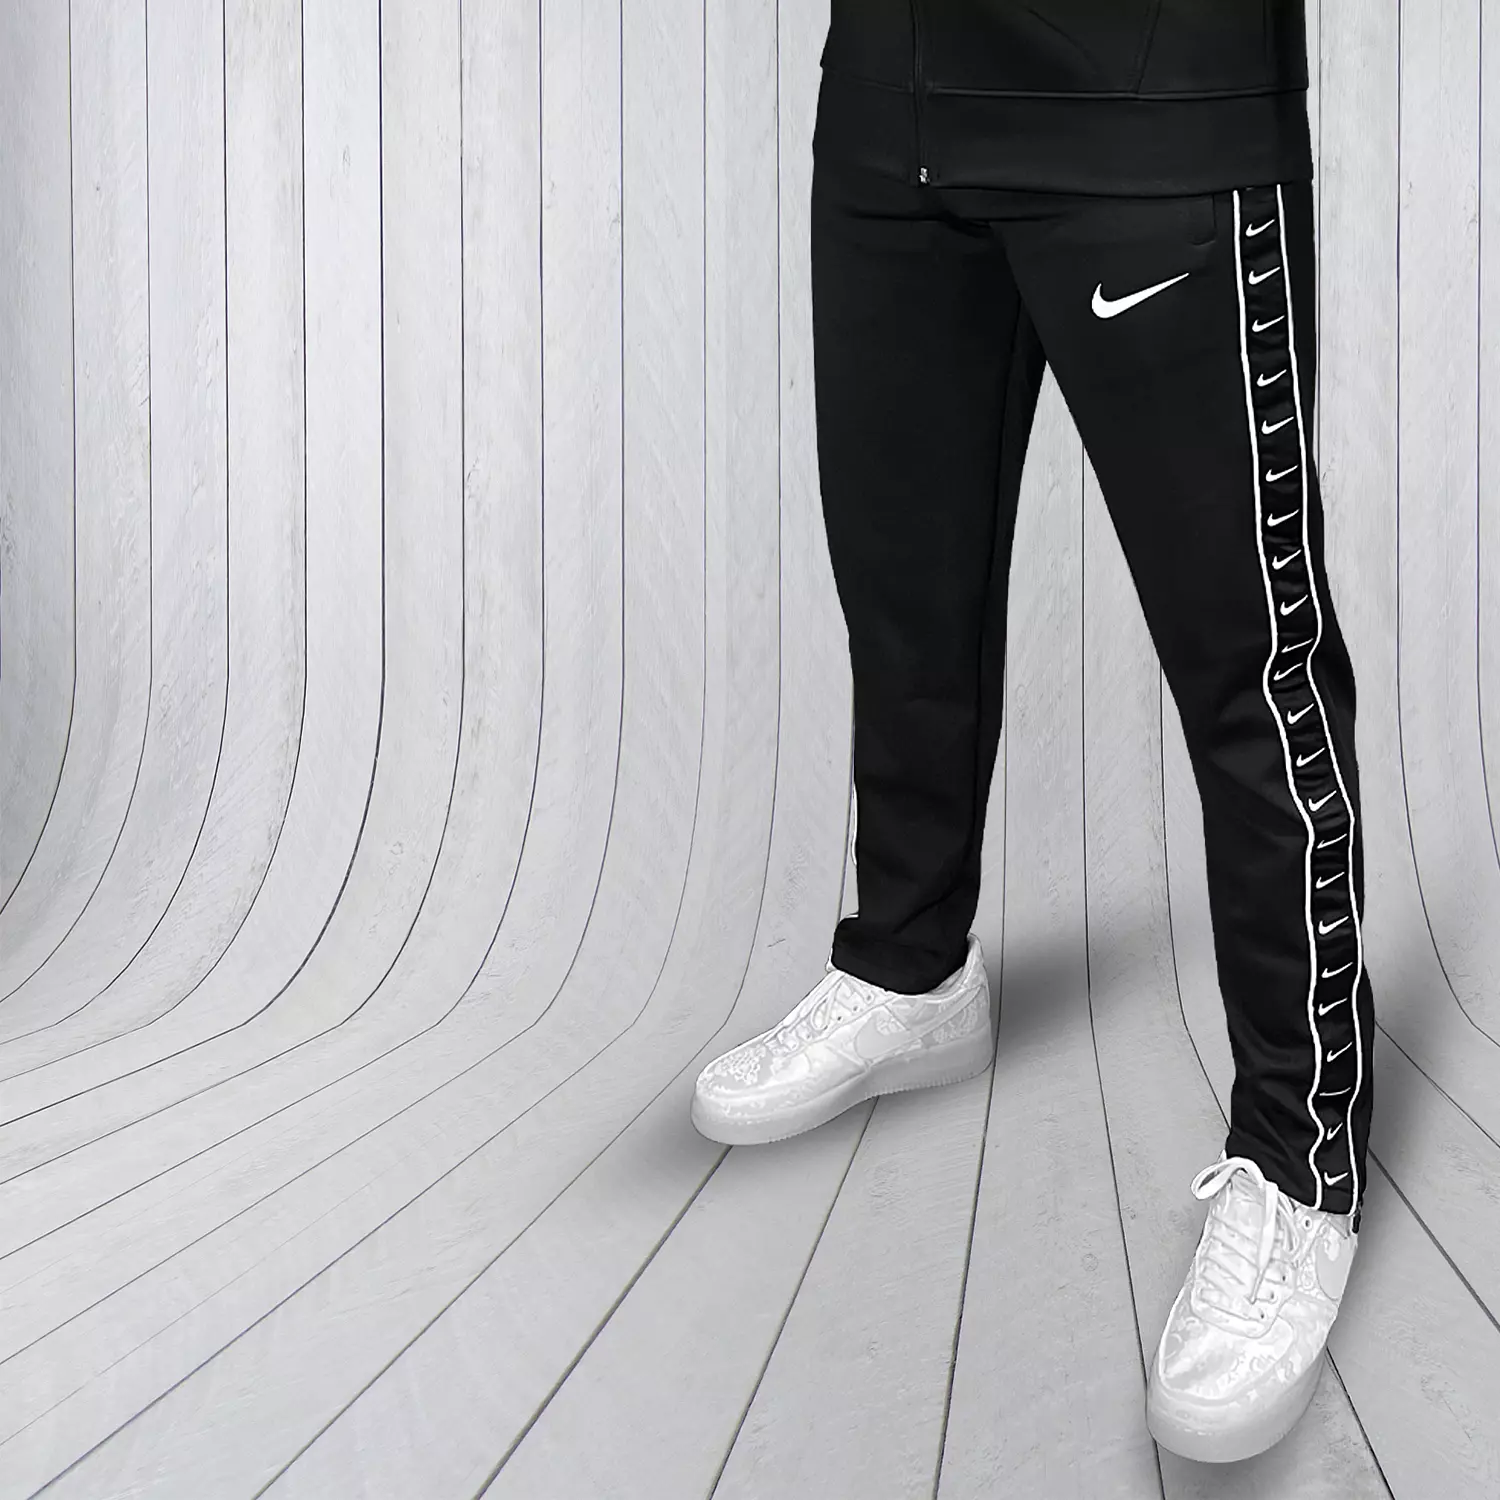 NIKE SPORTS PANT hover image